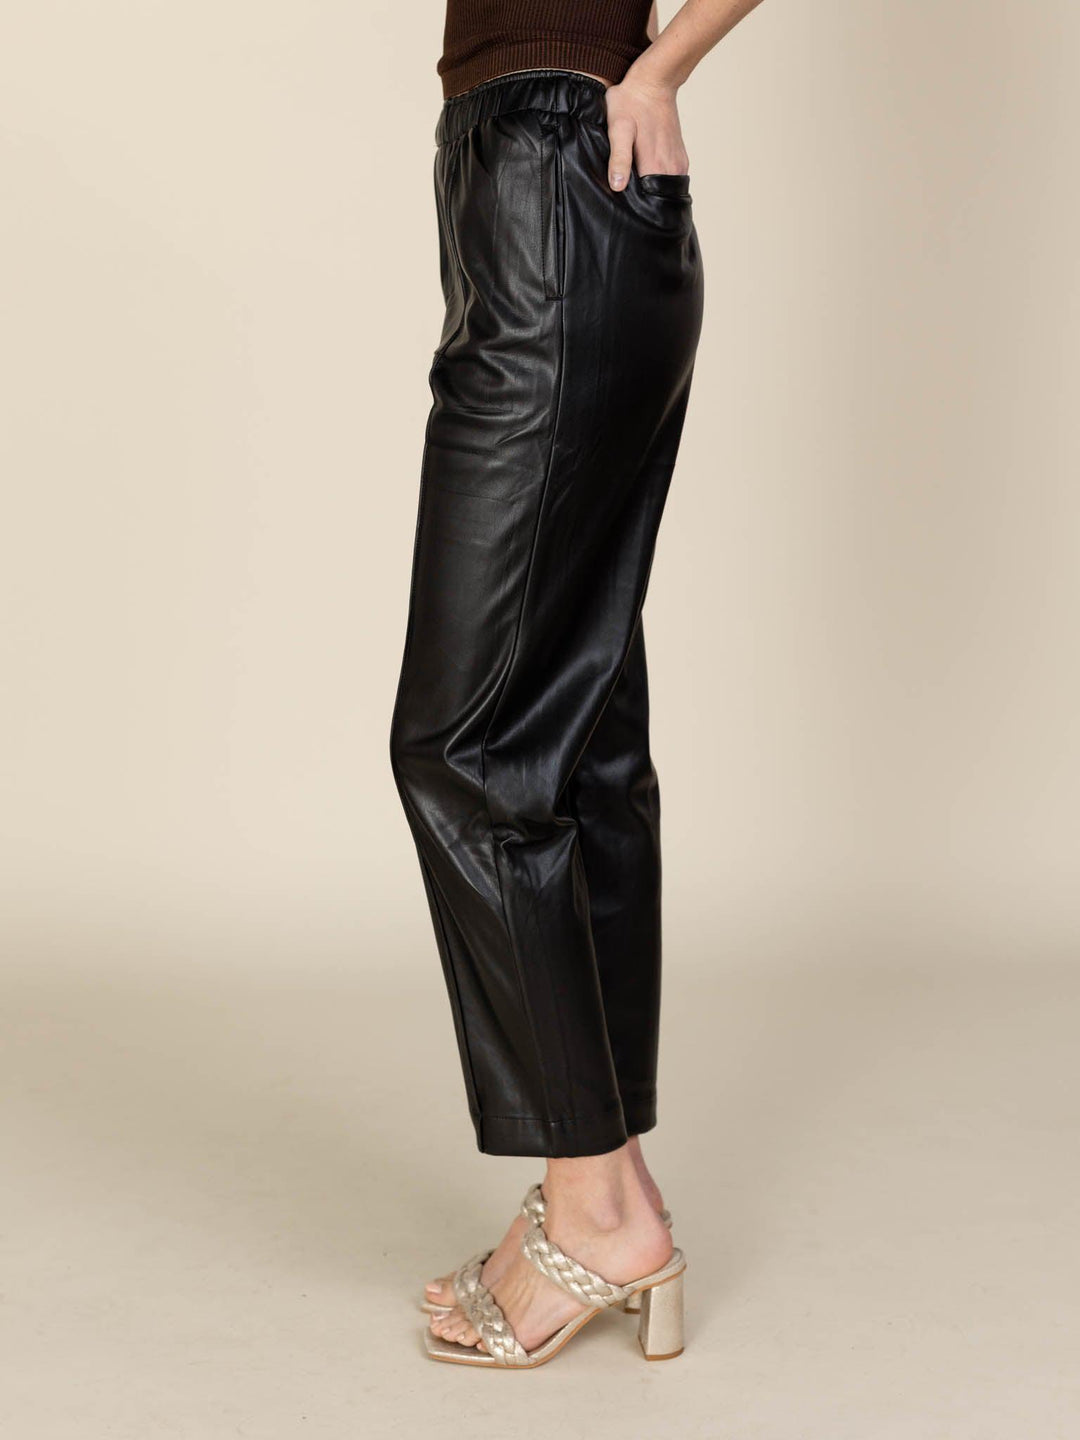 elastic waist thread and supply leather pant